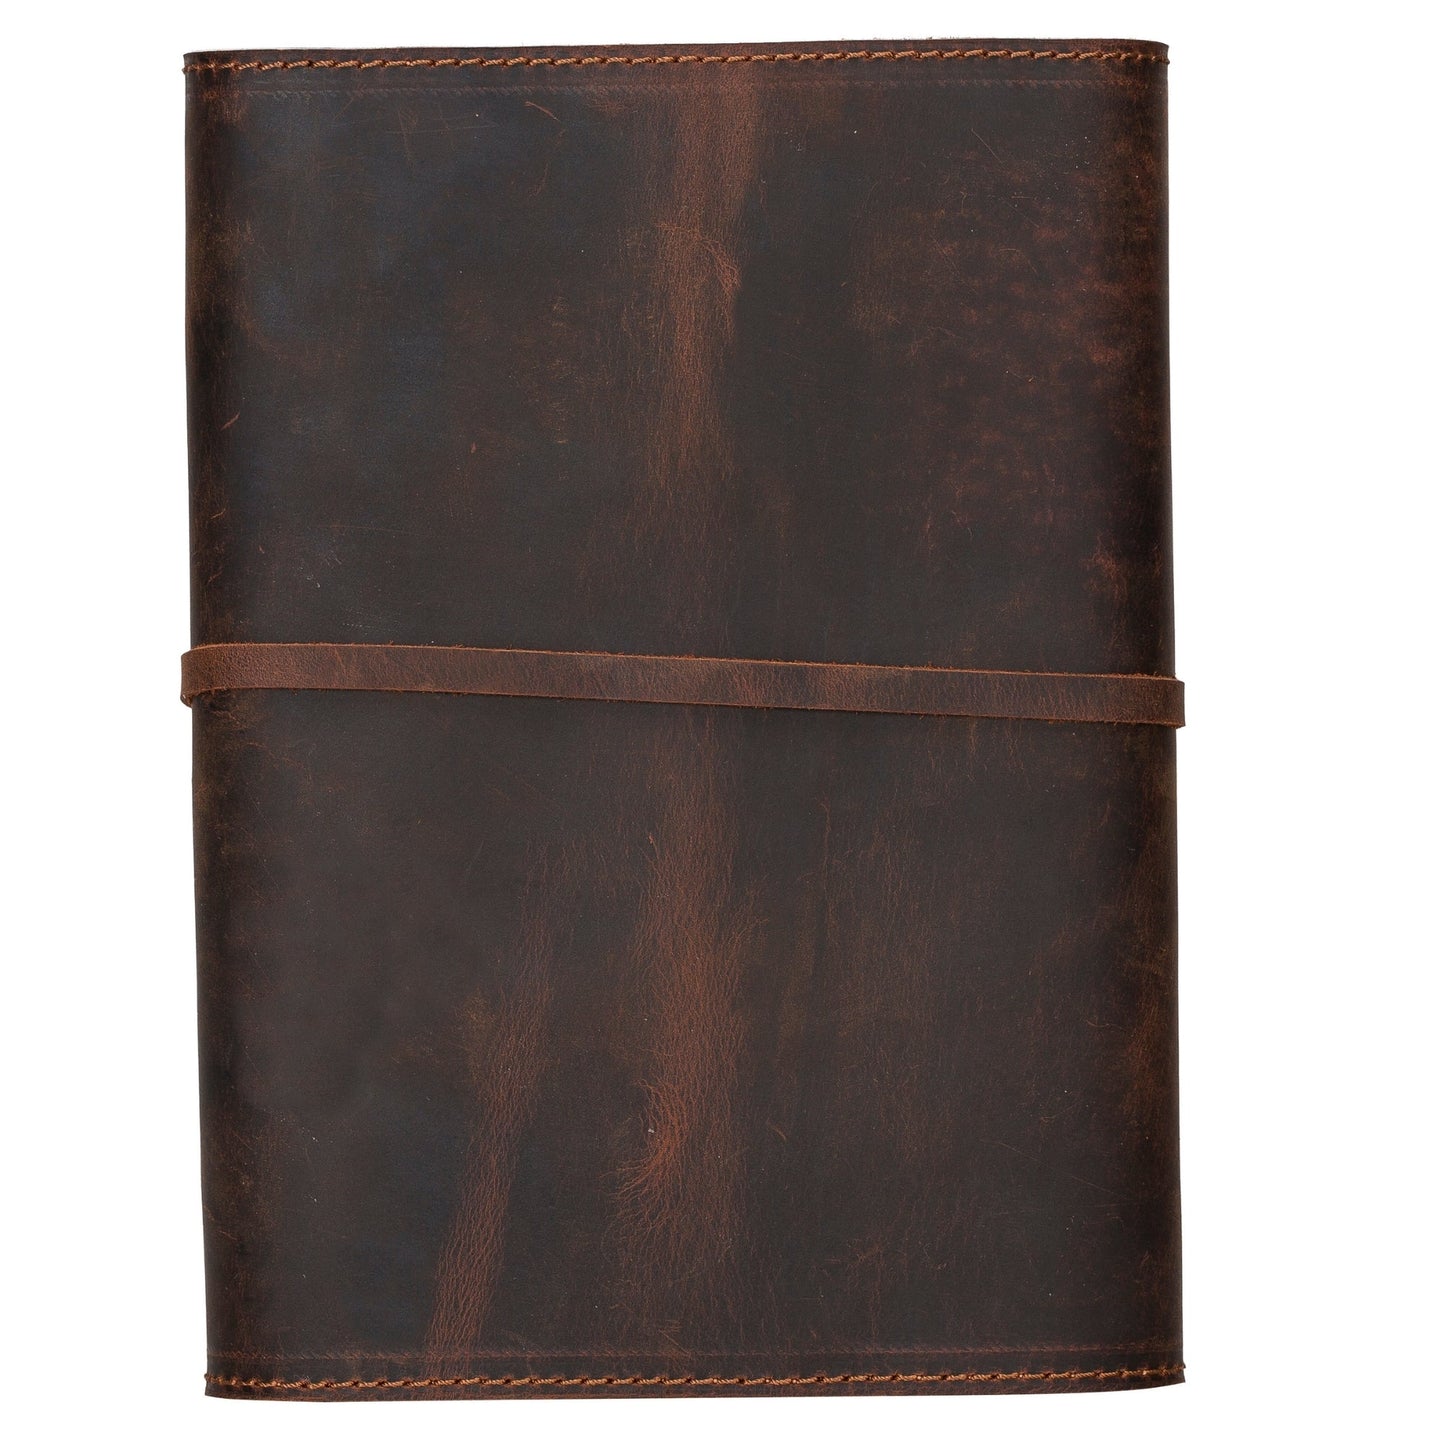 Broomfield Handcrafted Leather Diary Cover